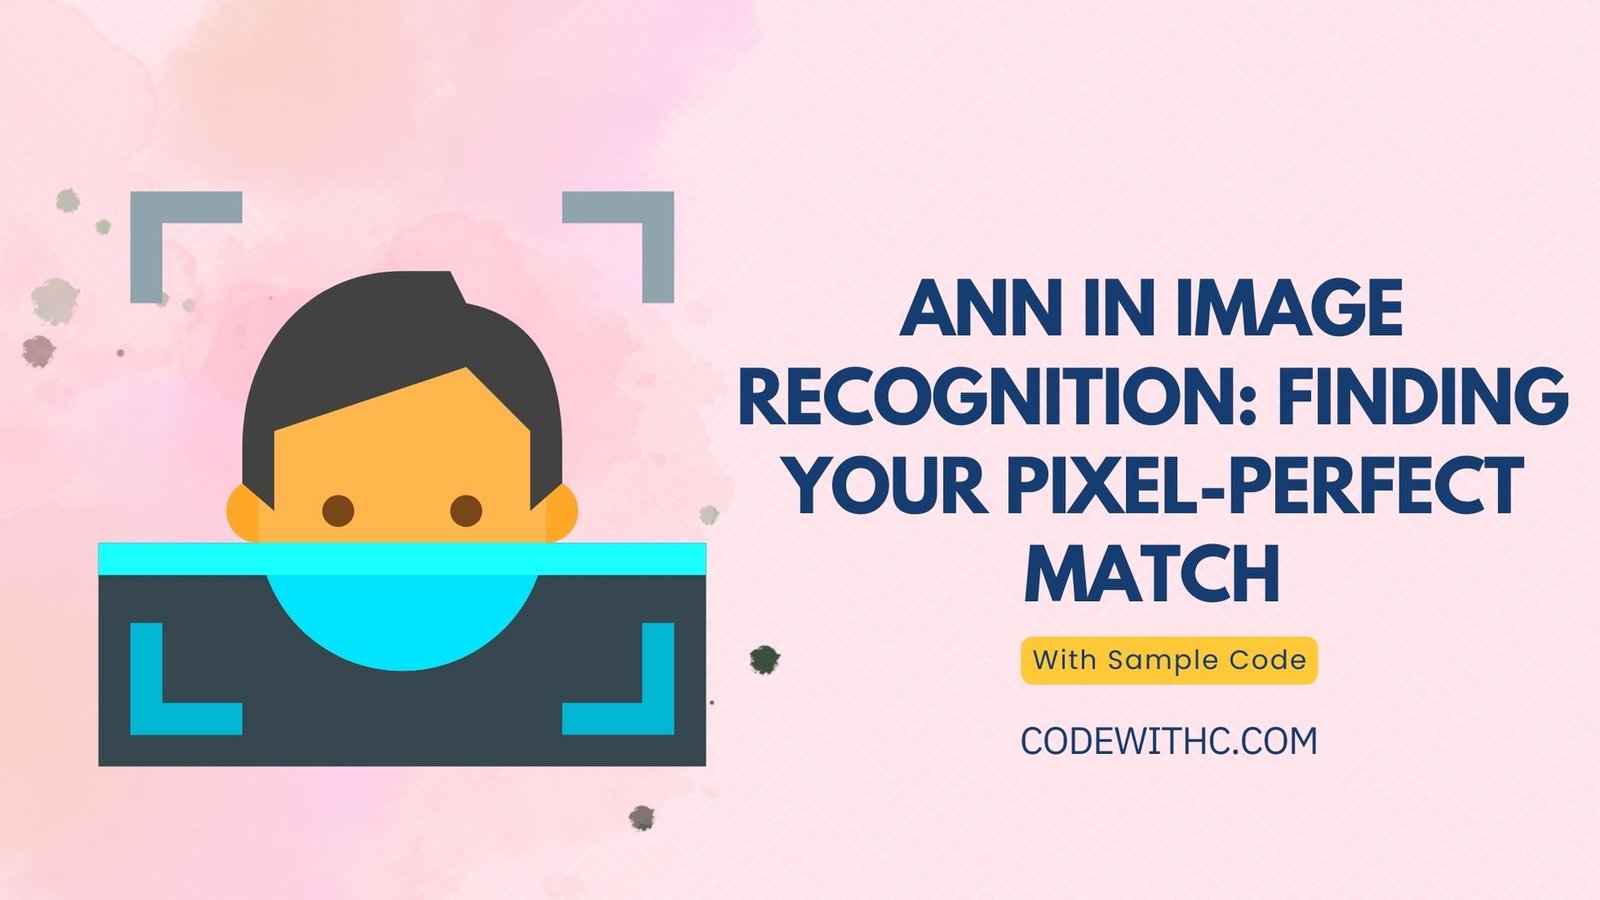 ANN in Image Recognition: Finding Your Pixel-Perfect Match